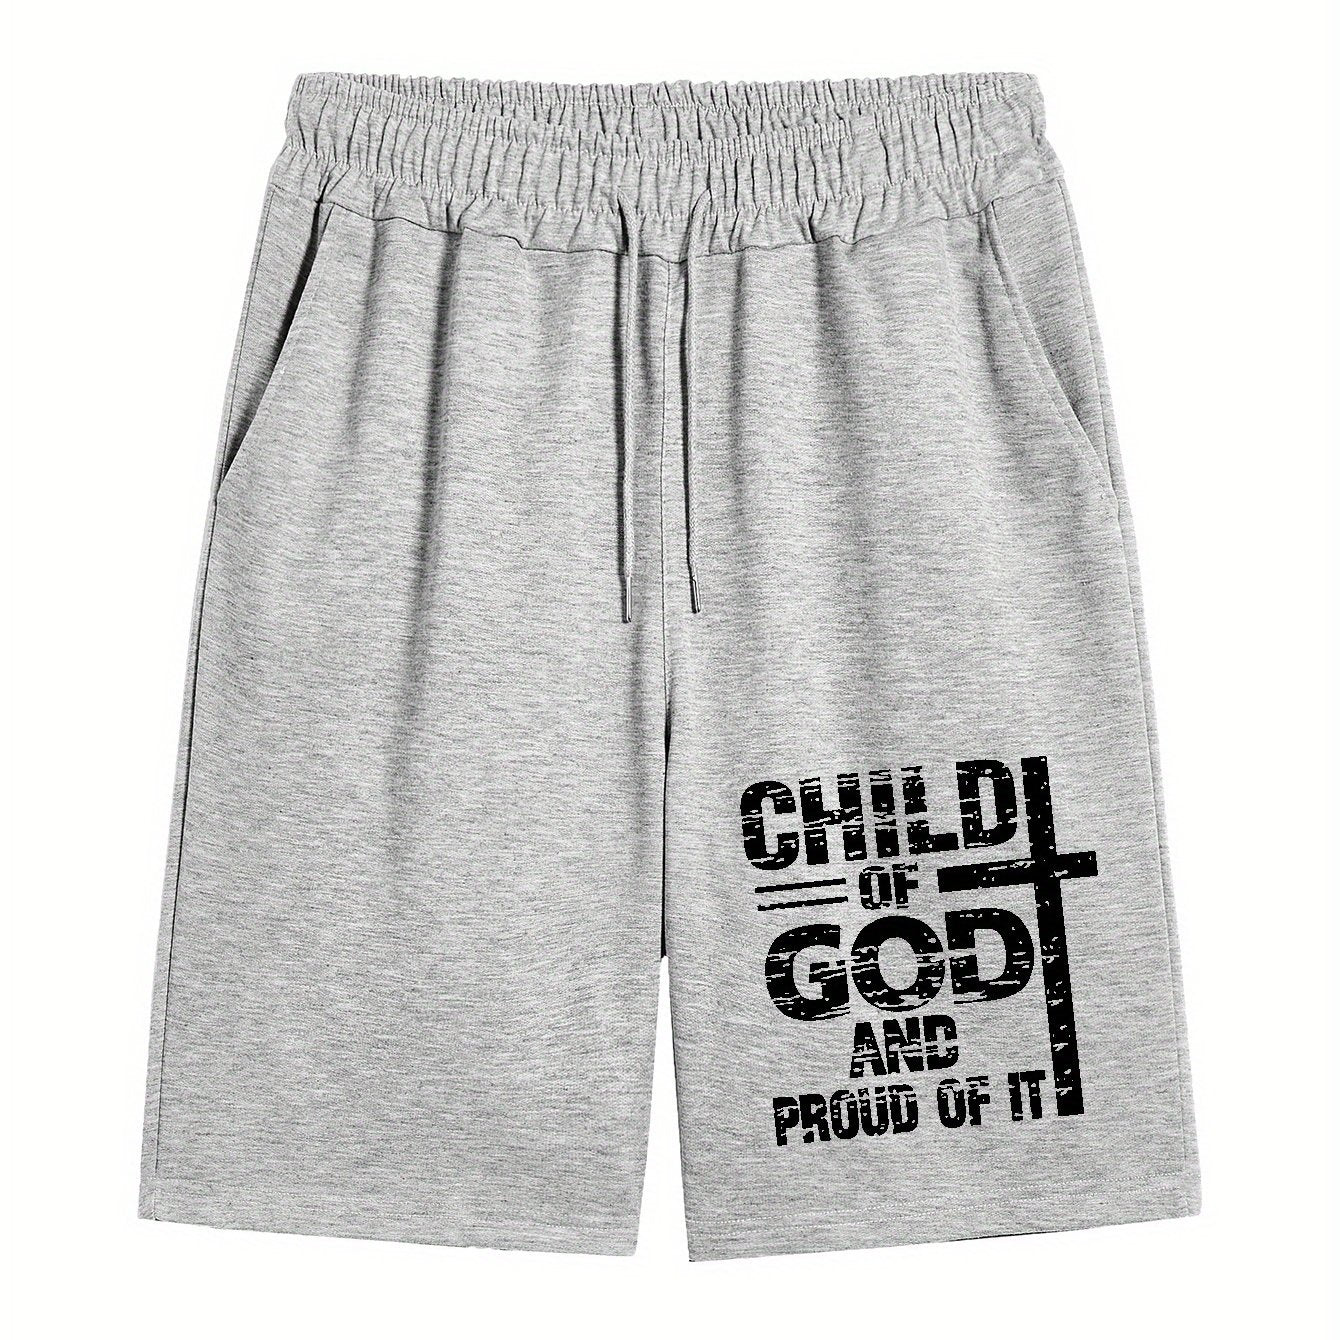 Child Of God And Proud Of It Men's Christian Shorts claimedbygoddesigns